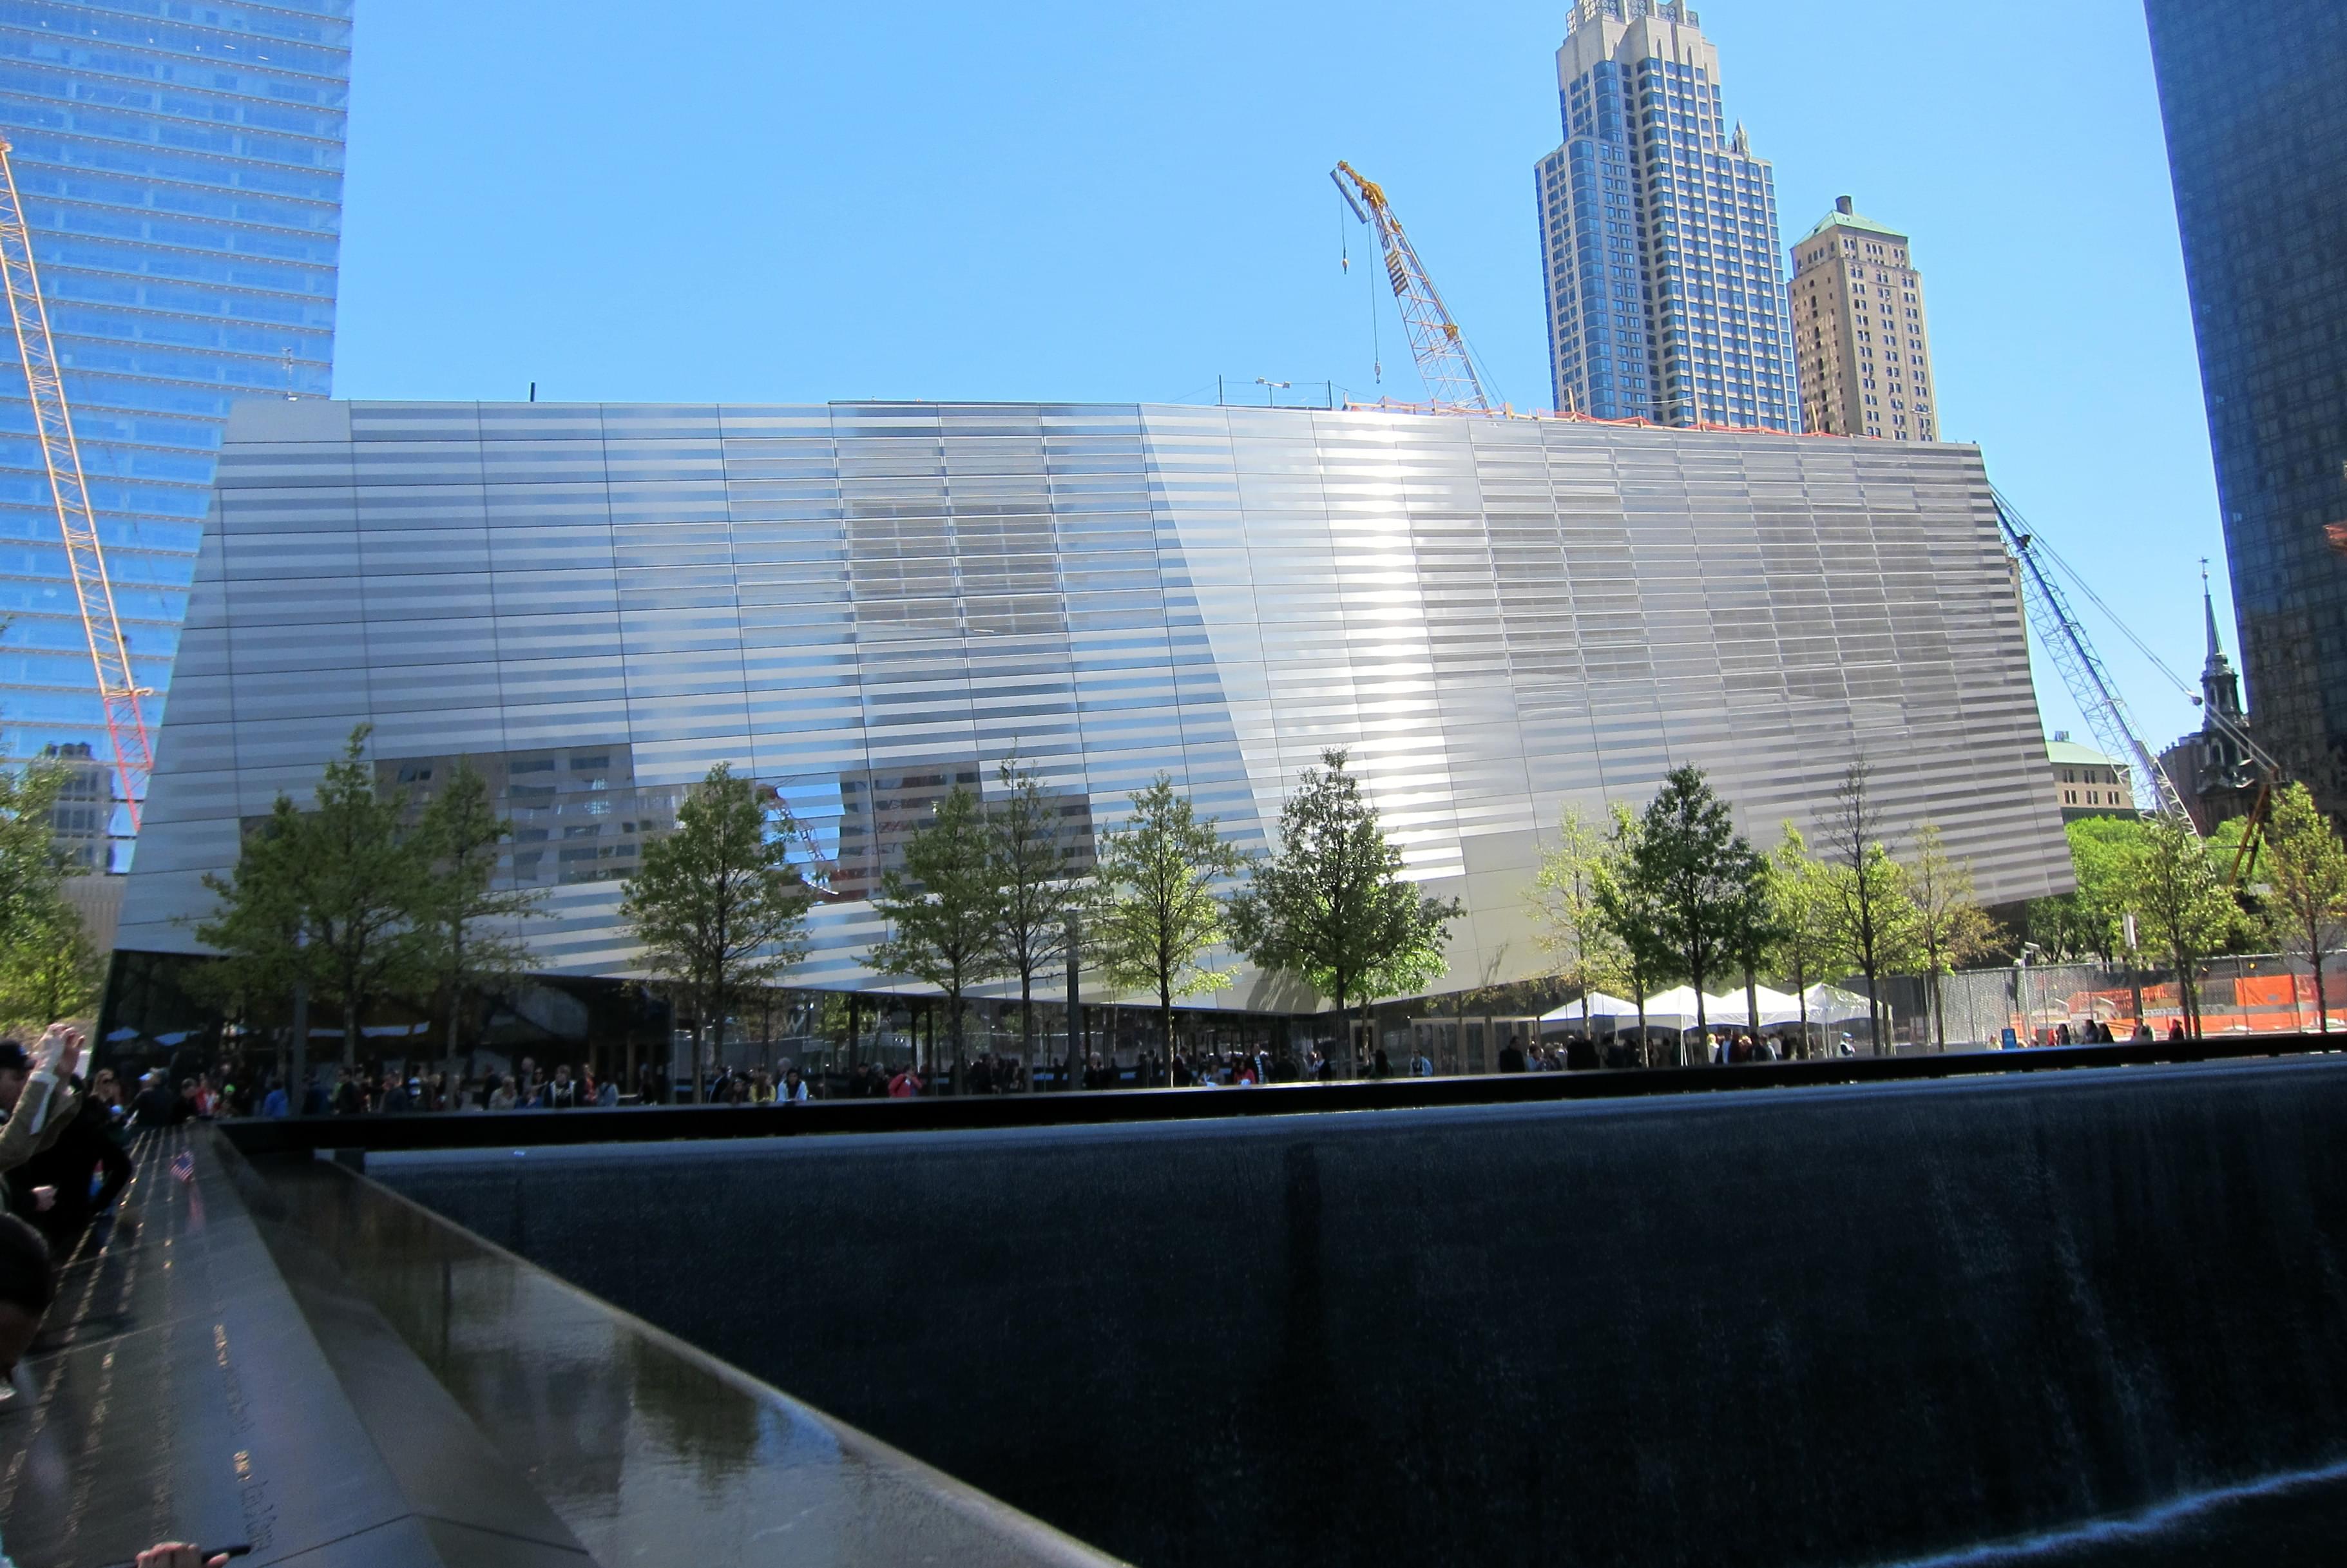 911 museum from outside